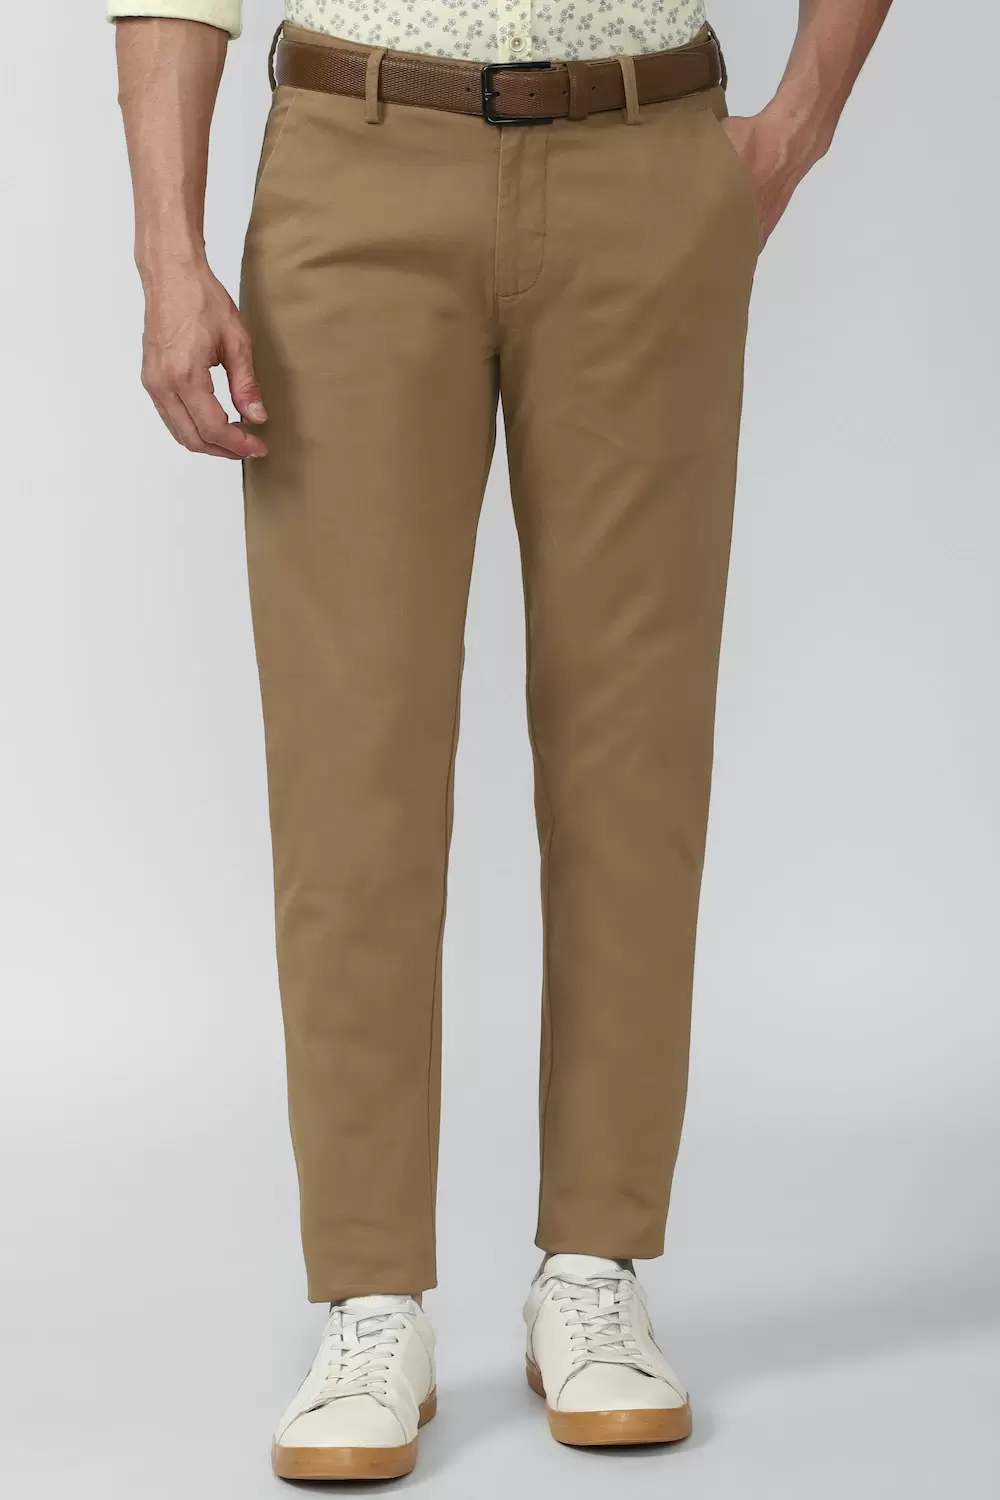 Peter England Formal Trousers  Buy Peter England Men Grey Check Slim Fit  Formal Trouser Online  Nykaa Fashion